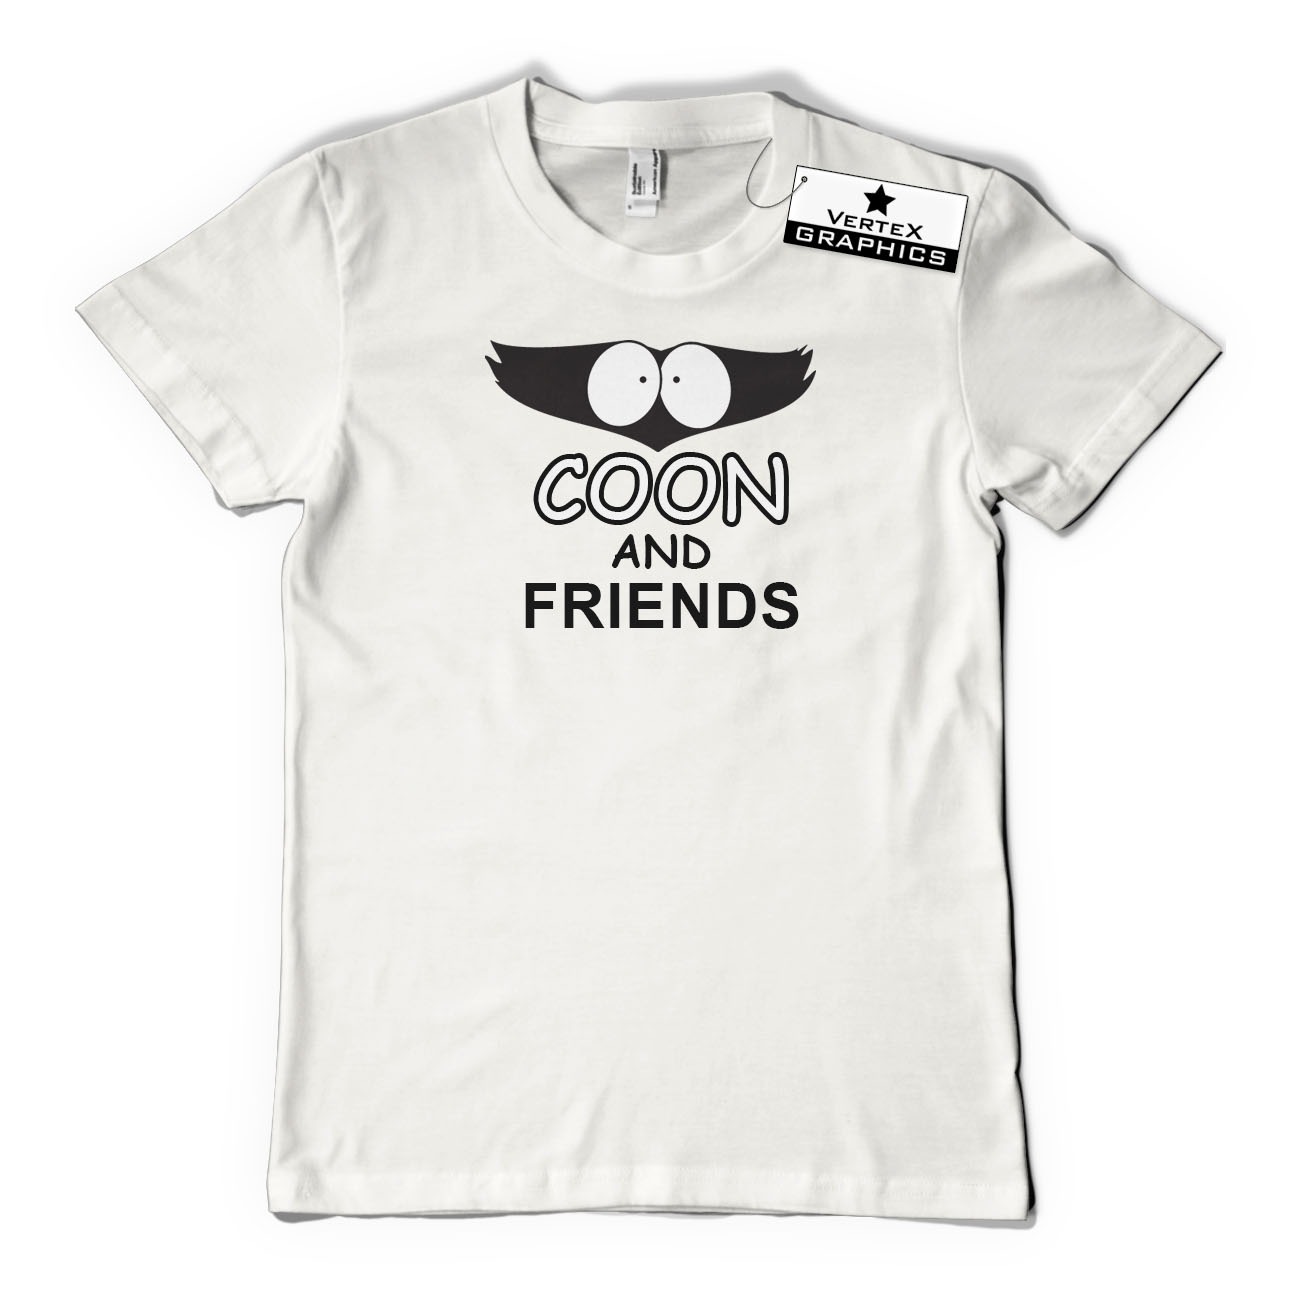 Coon and Friends T-Shirt | Funny, Gift, Slogan, South Park, TV | eBay